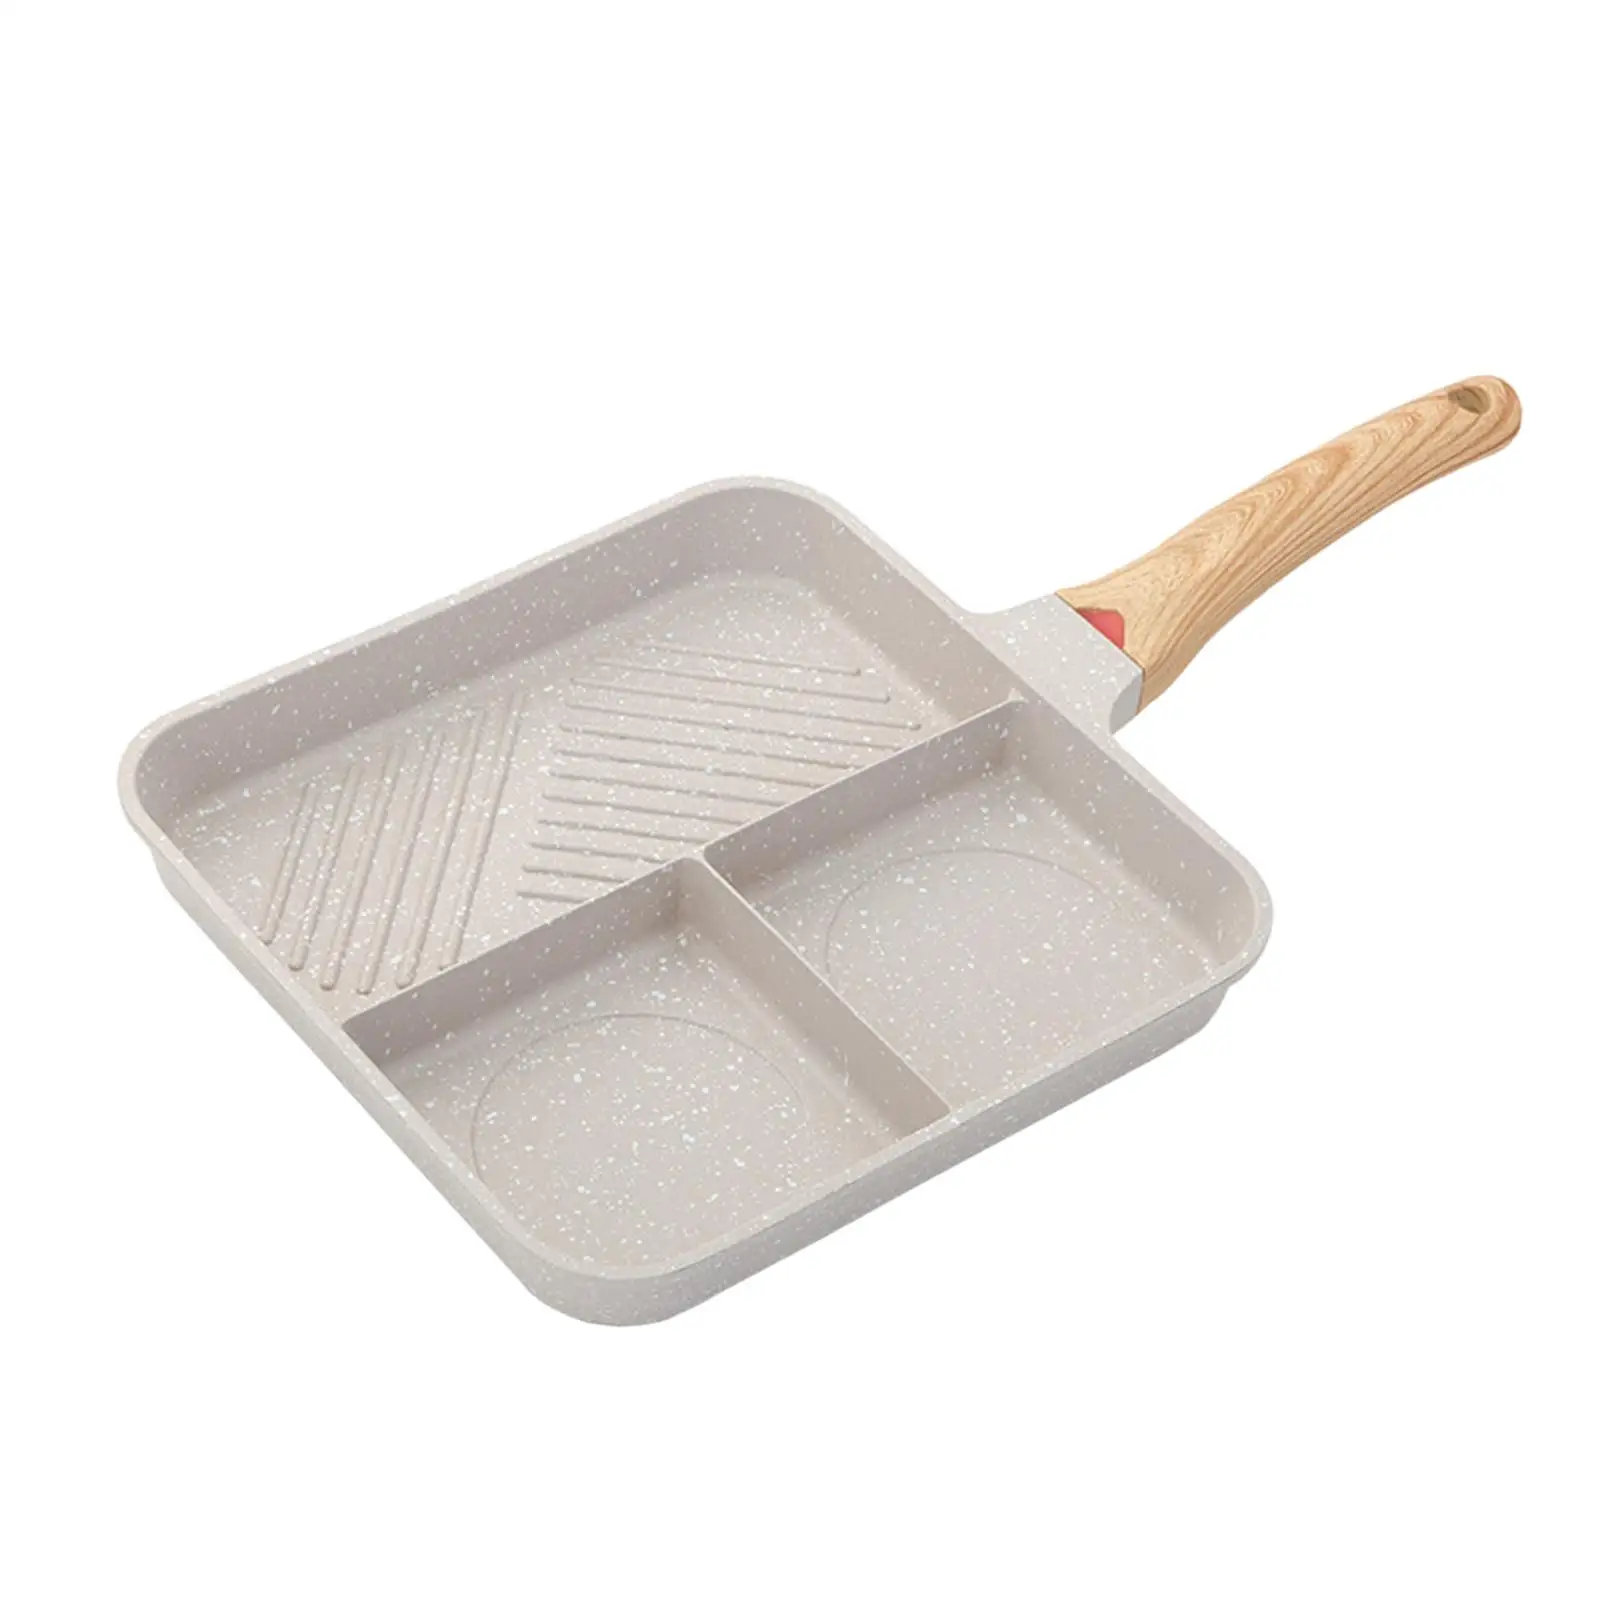 Frying Pan Steak Skillet 3 Compartment Breakfast Pot Multifunction Square Grilling Pan for Hiking Picnic Travel Camping Baking